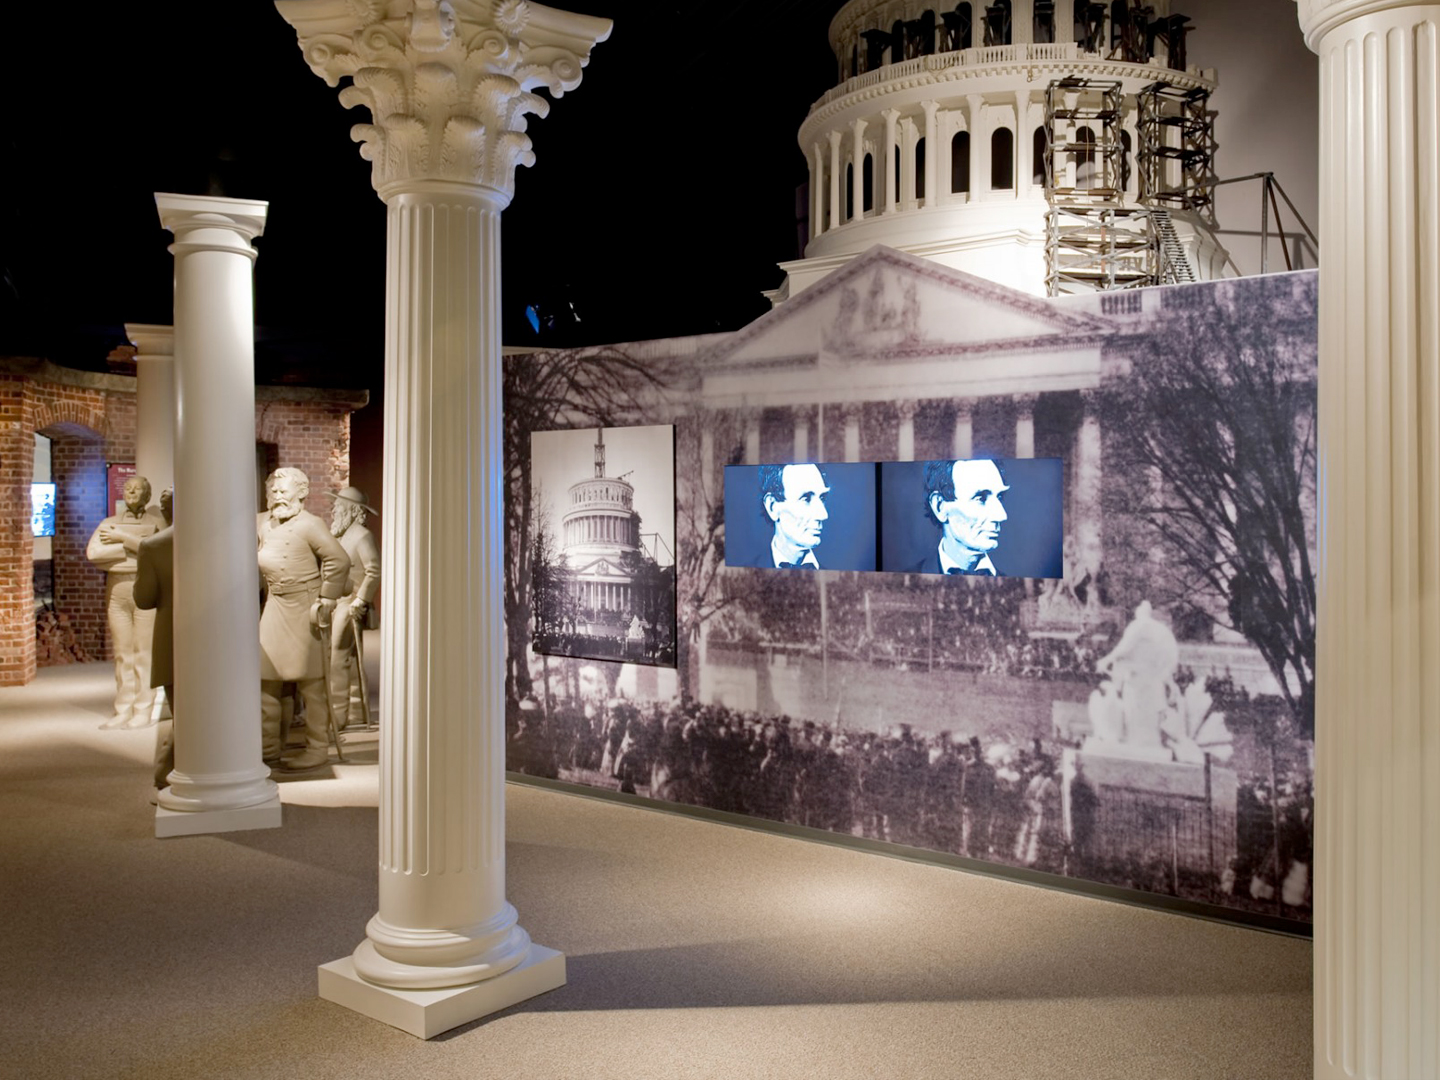 Inside the Ford’s Theatre Museum, two television screens display close-up images of Abraham Lincoln’s face. The screens are embedded in a display that is a large-scale photograph of the partially constructed U.S. Capitol dome taken during the Civil War. In front of the display are three white columns, designed to evoke the Capitol. Behind the display is a model of the partially constructed dome.